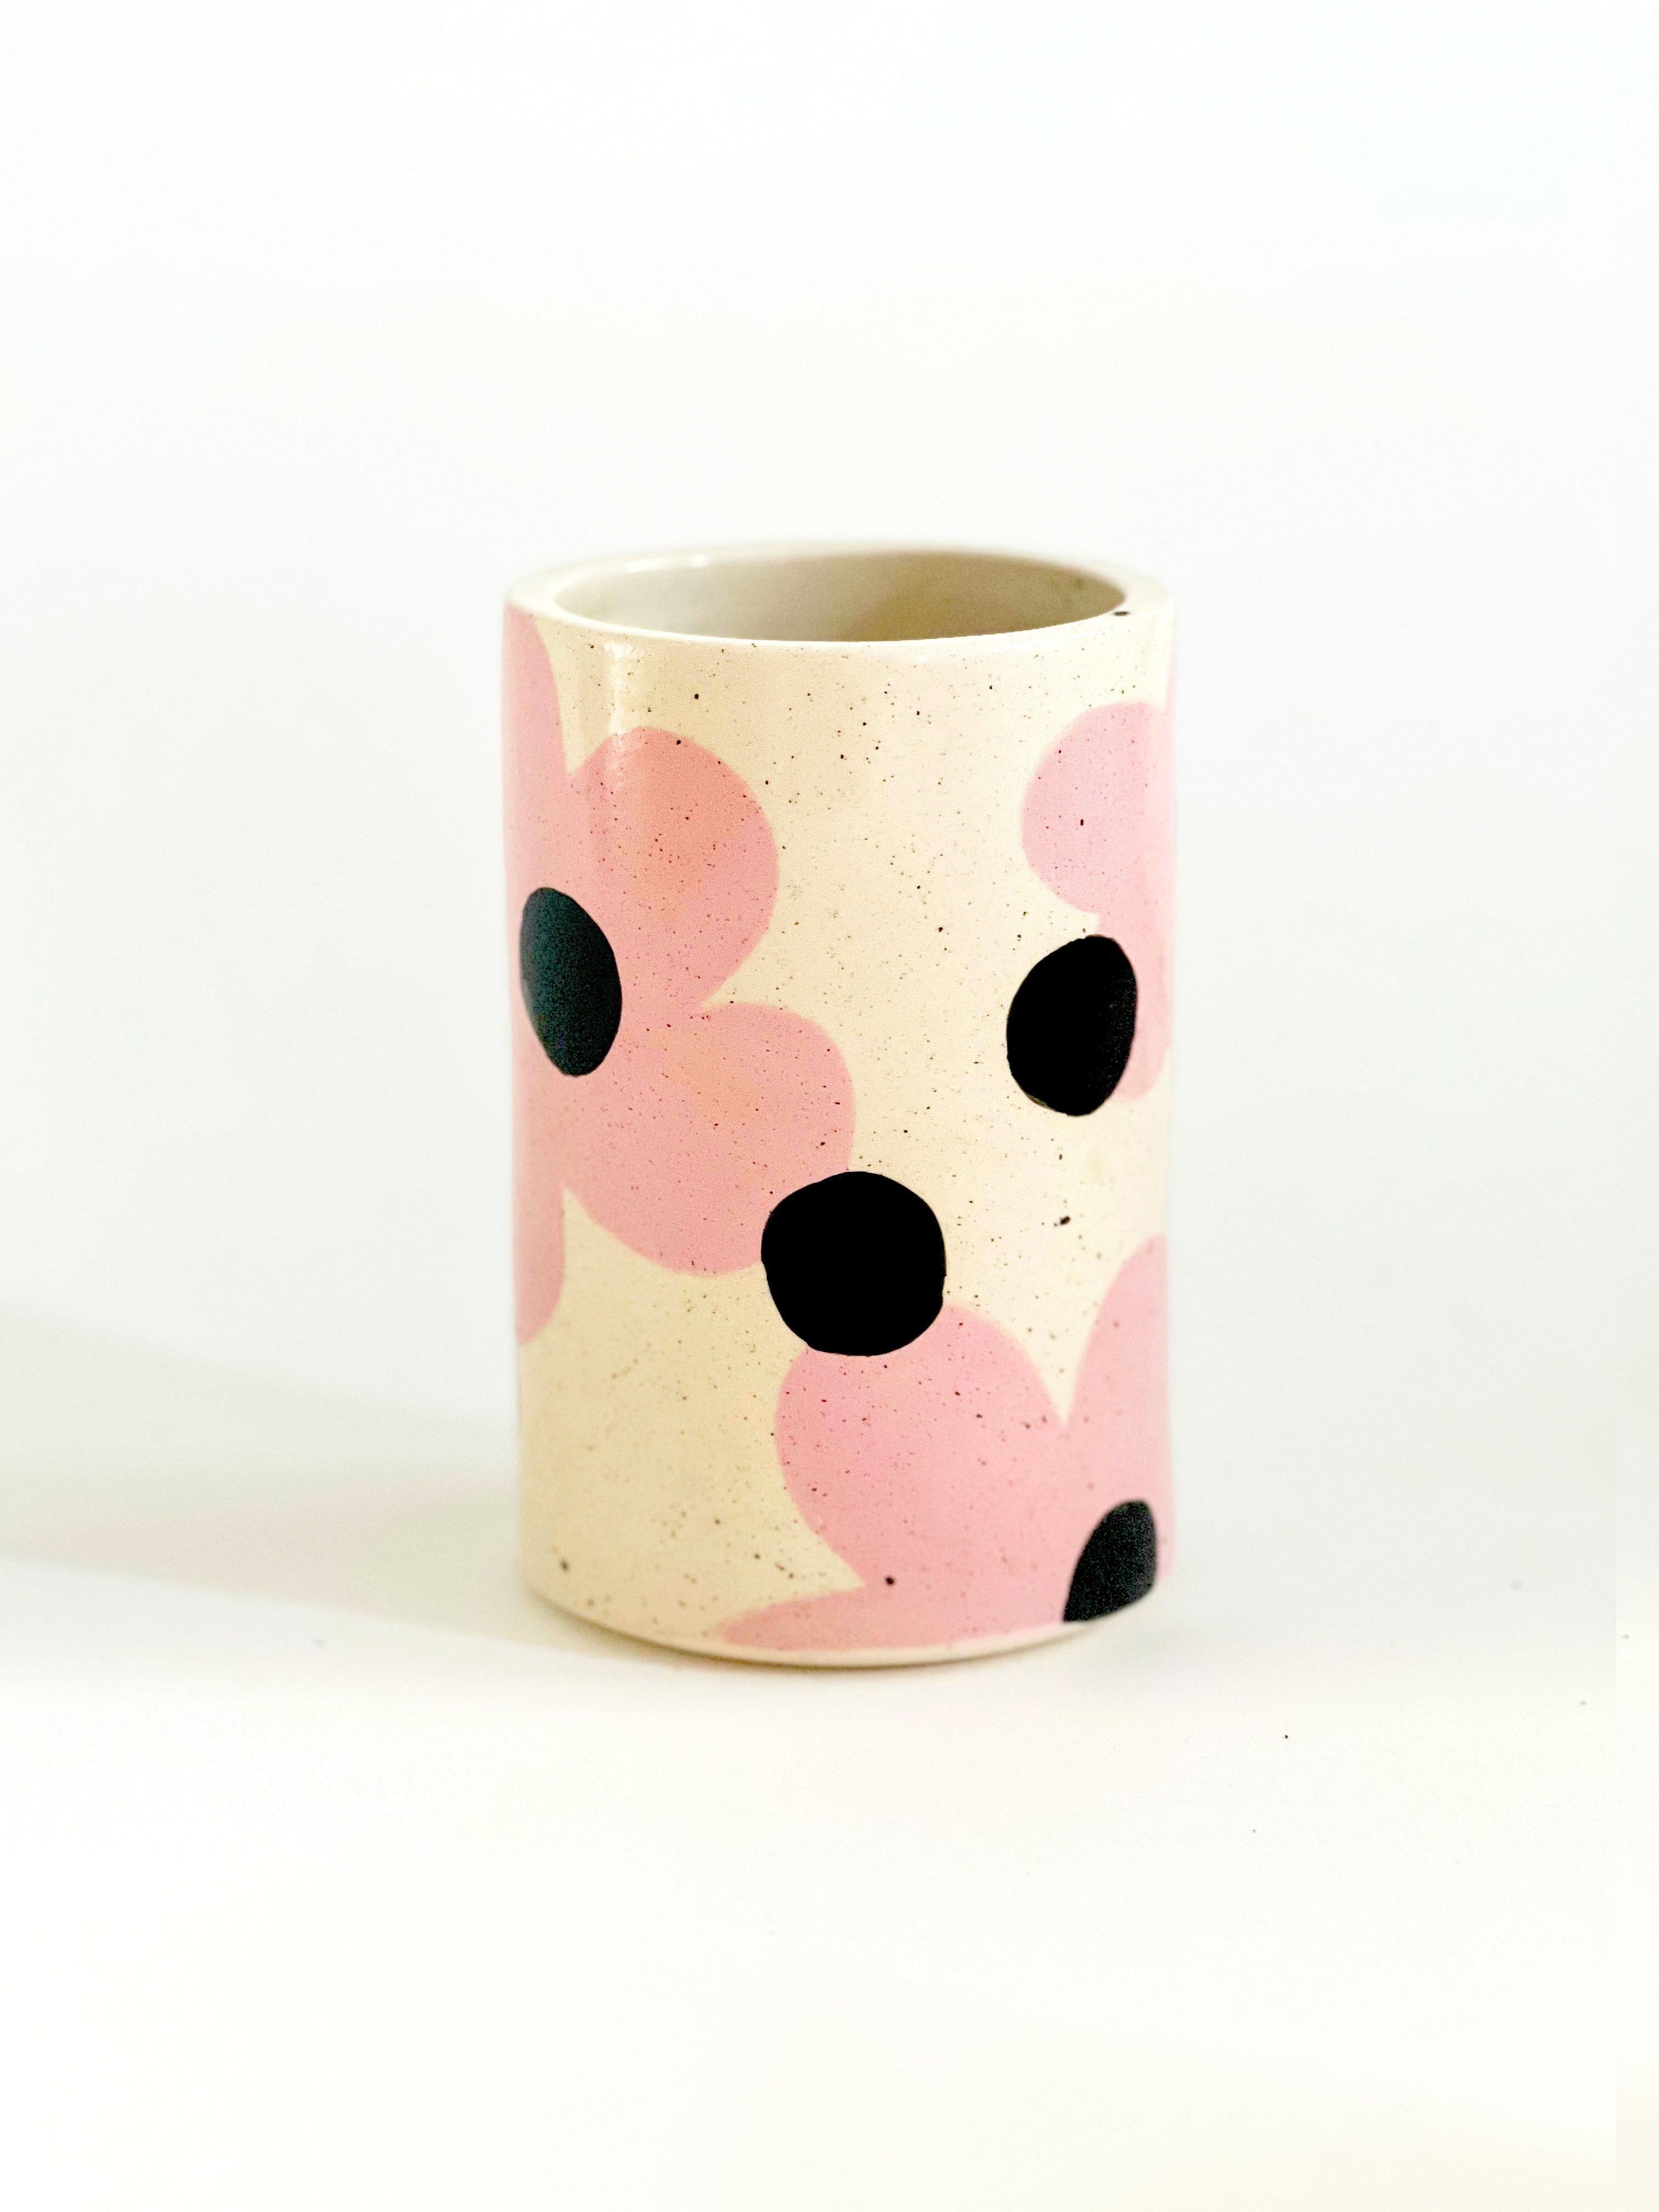 Playful hand-painted Vase